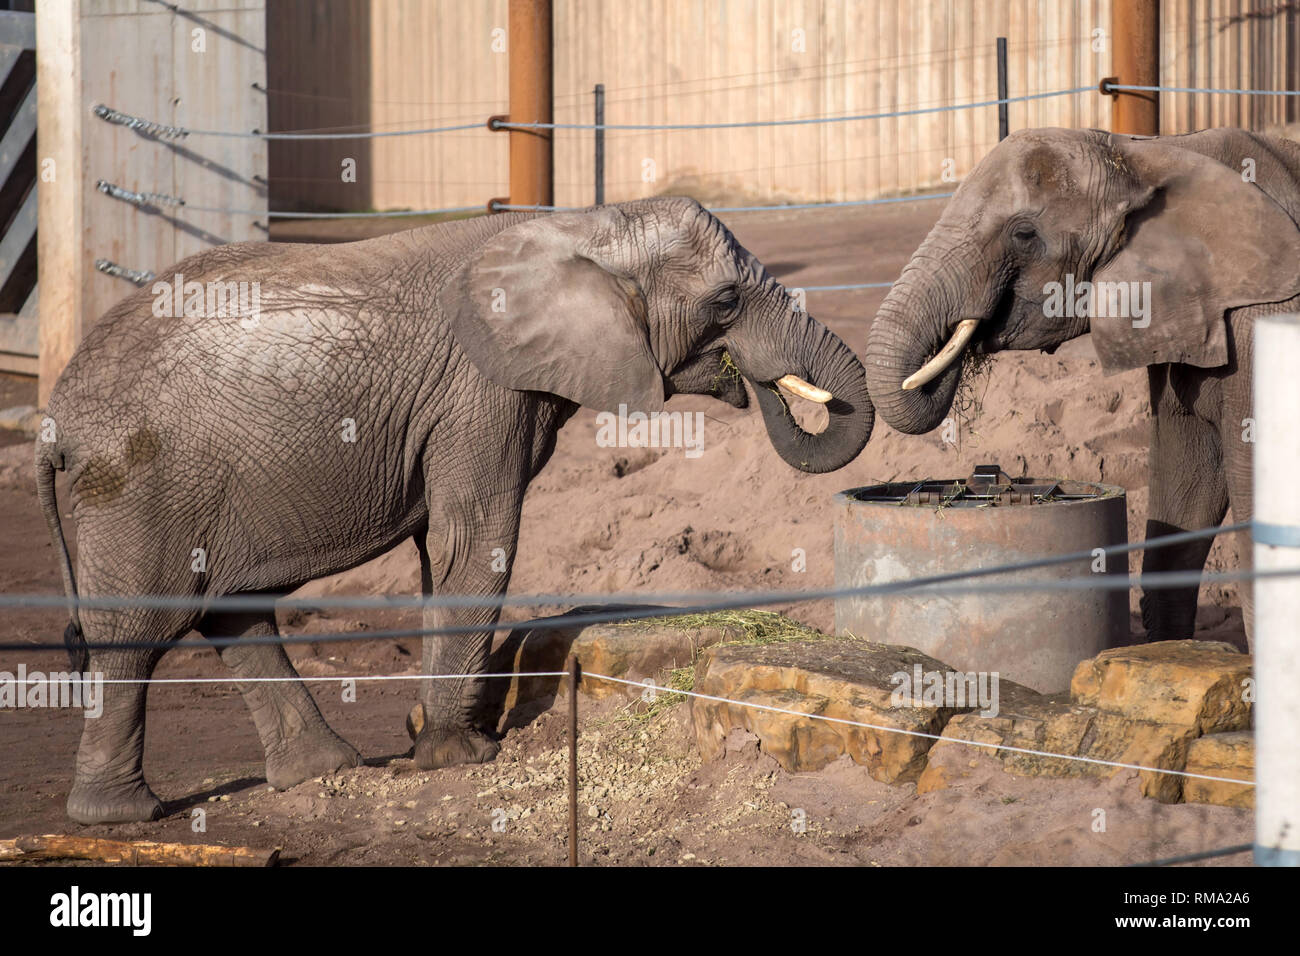 Erfurt, Germany. 14th Feb, 2019. Elephant cow Chupa (l) stands with Elephant Safari in the enclosure at the new elephant house in the zoo park Erfurt. The pachyderm Chupa is pregnant and is expected to give birth to a small calf in July/August 2020 after a gestation period of 22 months. Credit: Michael Reichel/dpa/Alamy Live News Stock Photo